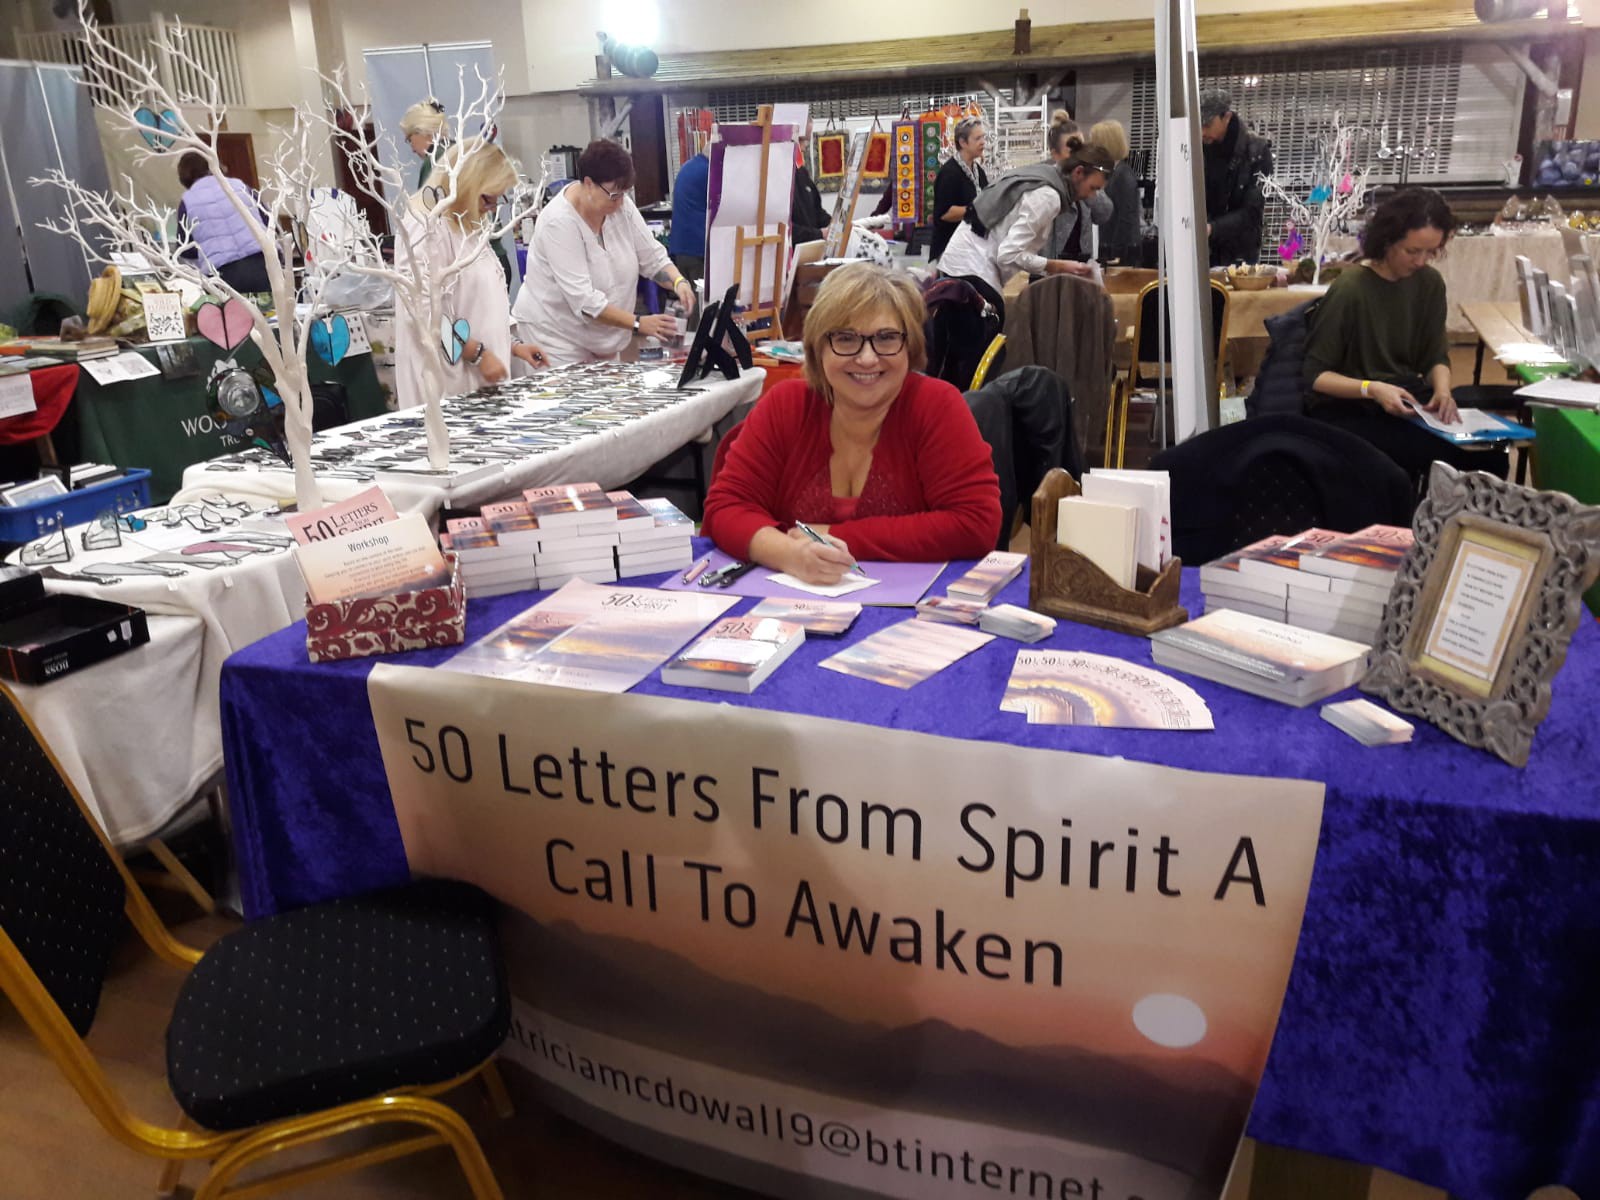 The author of ‘50 Letters from Spirit’, Patricia McDowall Attended an Event